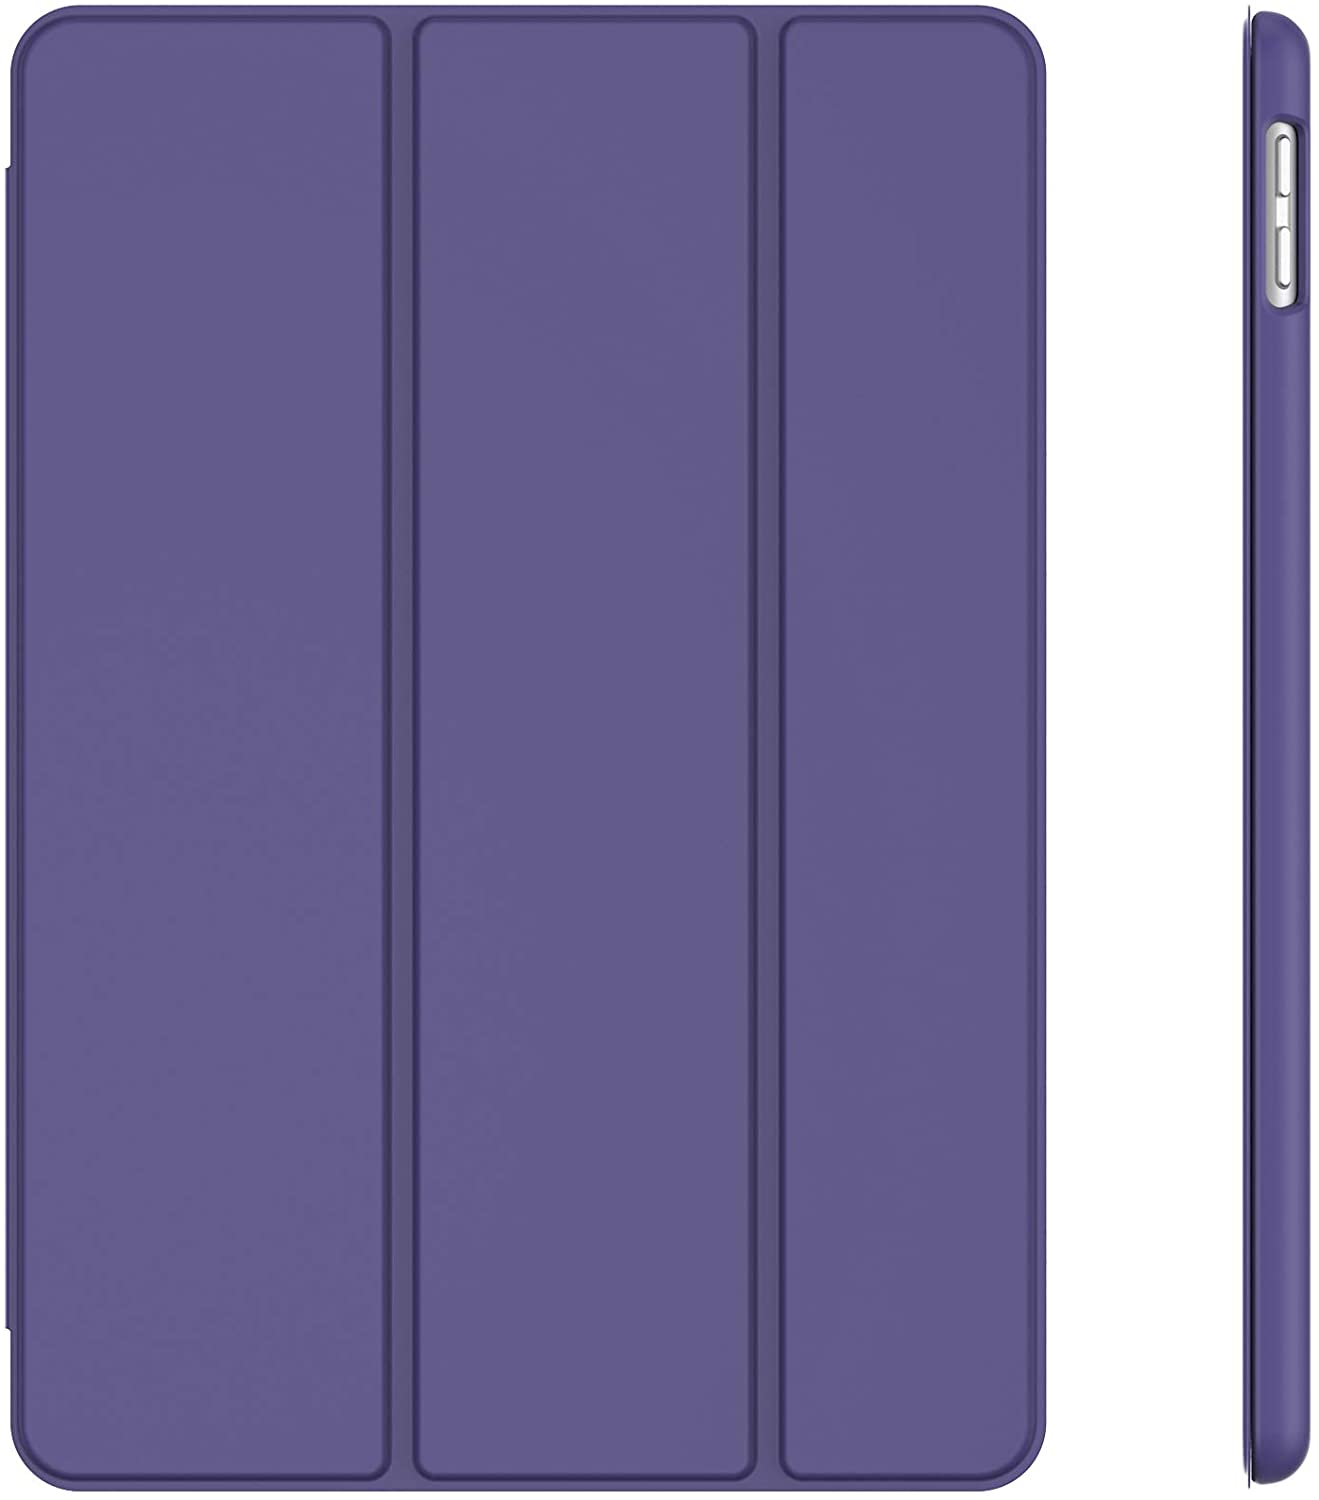 Case for New iPad 10.2 Inch 2020/2019 (8th&7th Generation). - e4cents